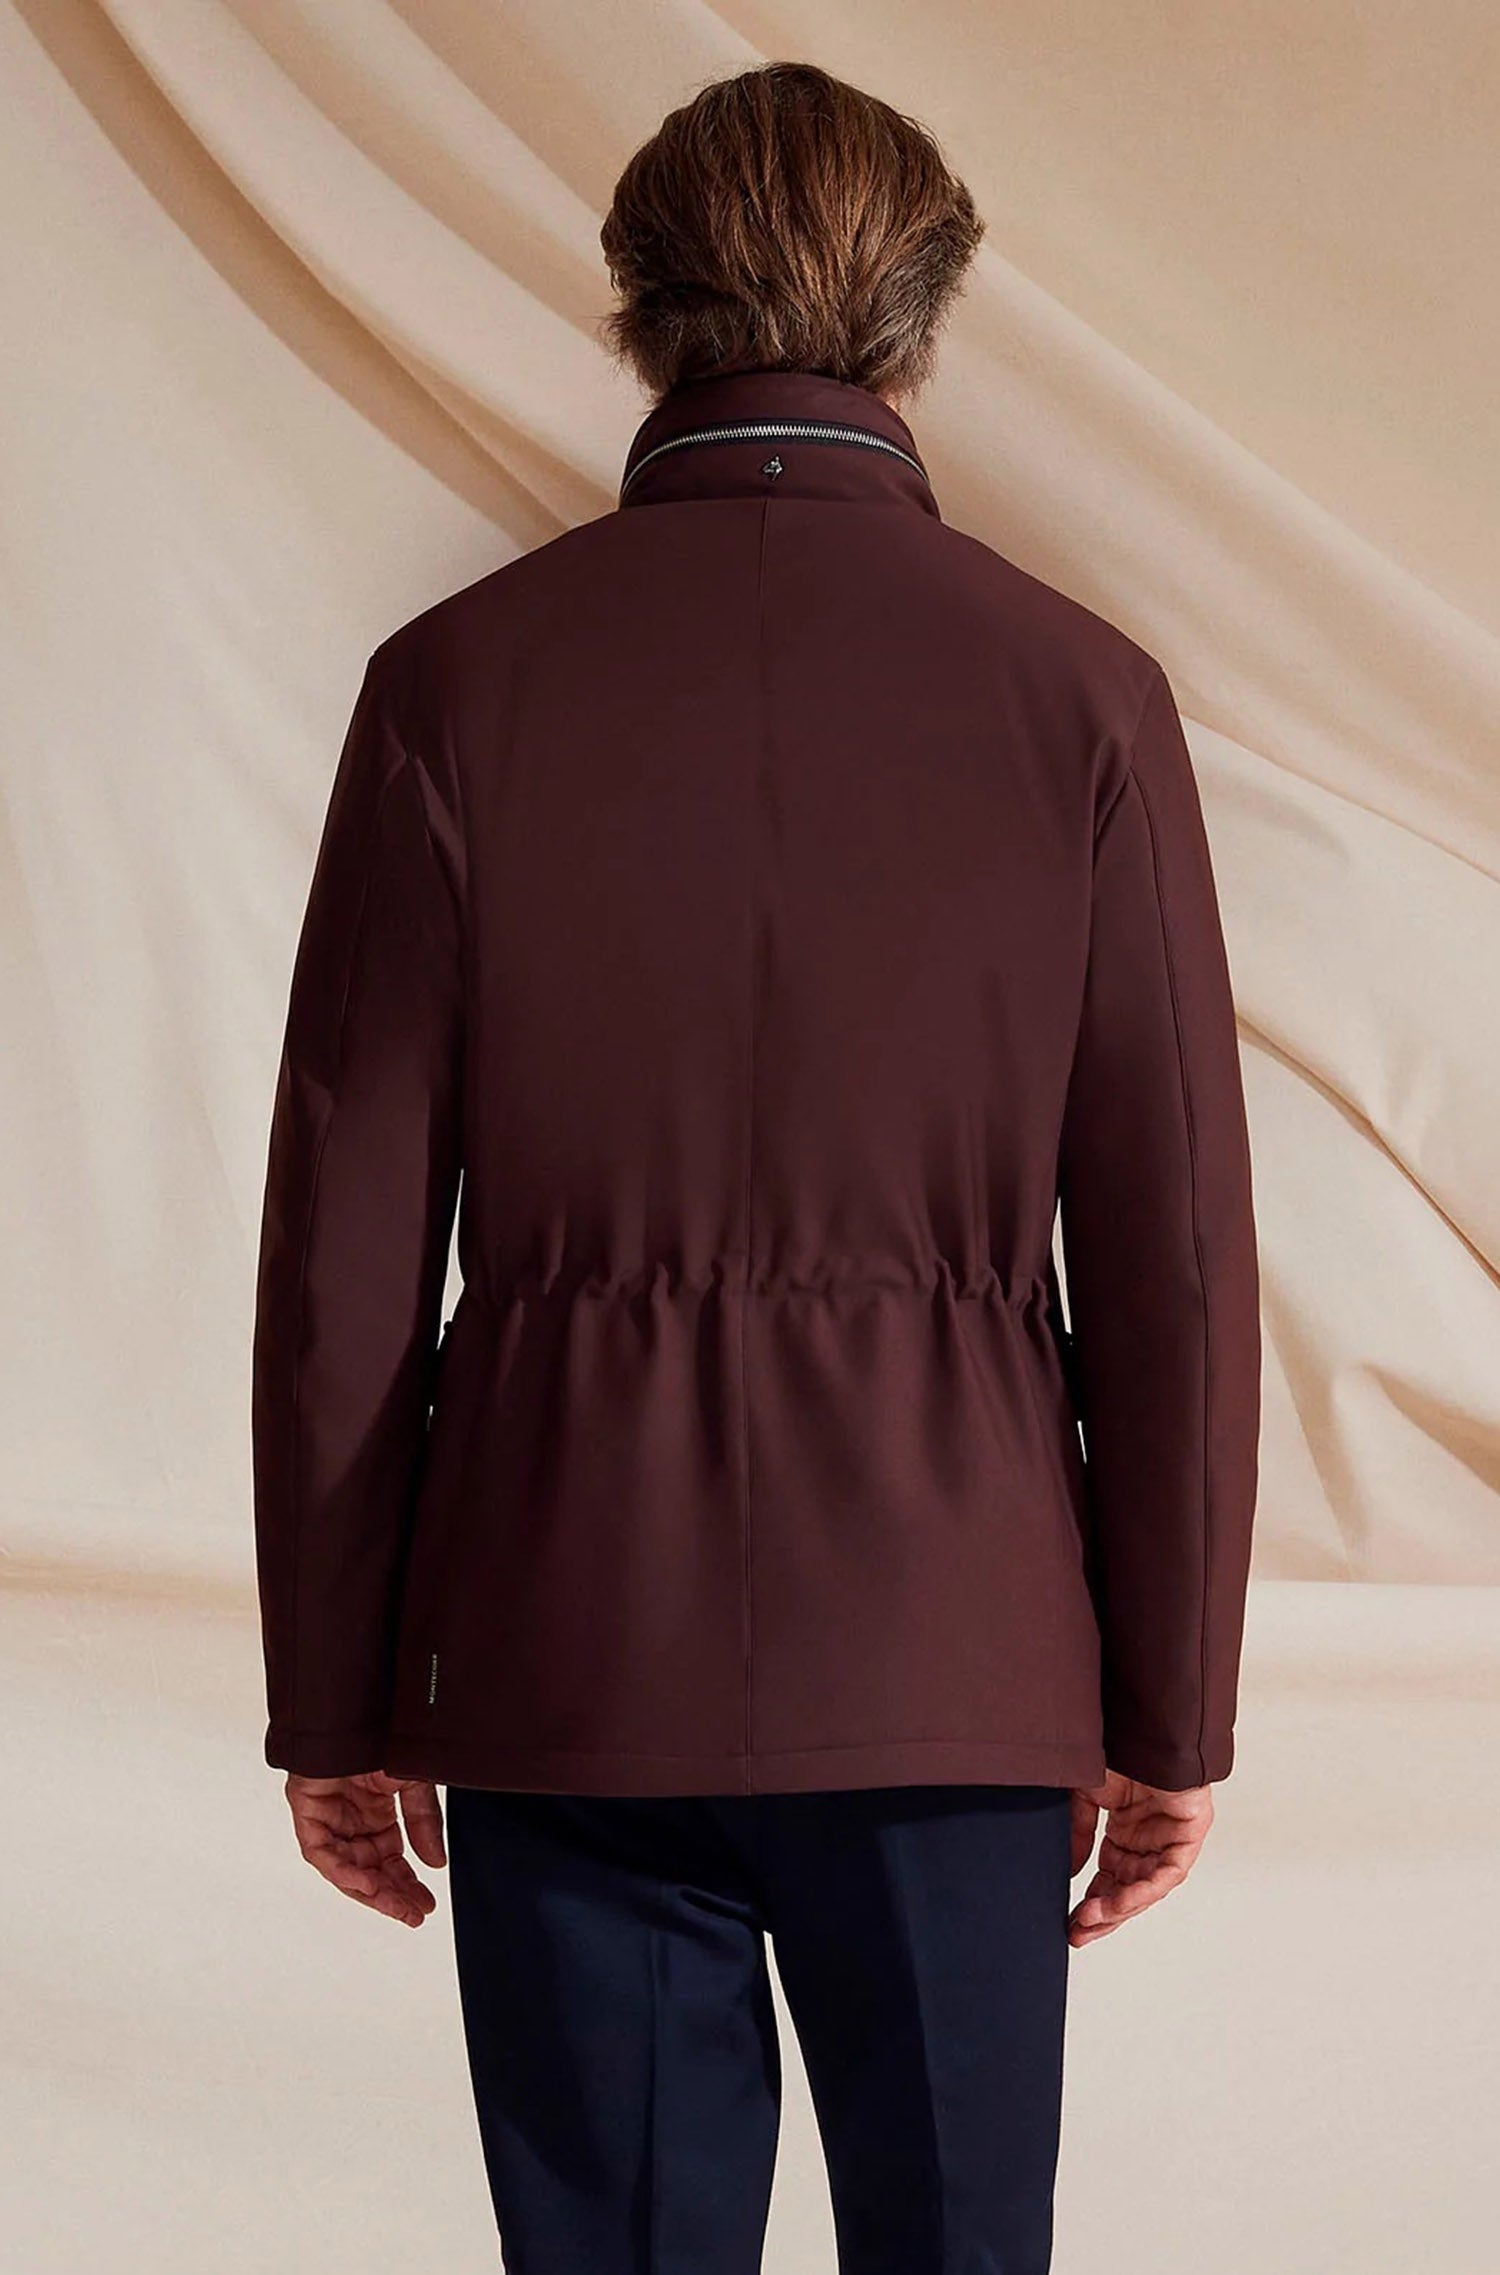 MONTECORE - Winter Jacket In Ultra-High-Density Fabric In Oxblood Red. F03MUCX536 101-20